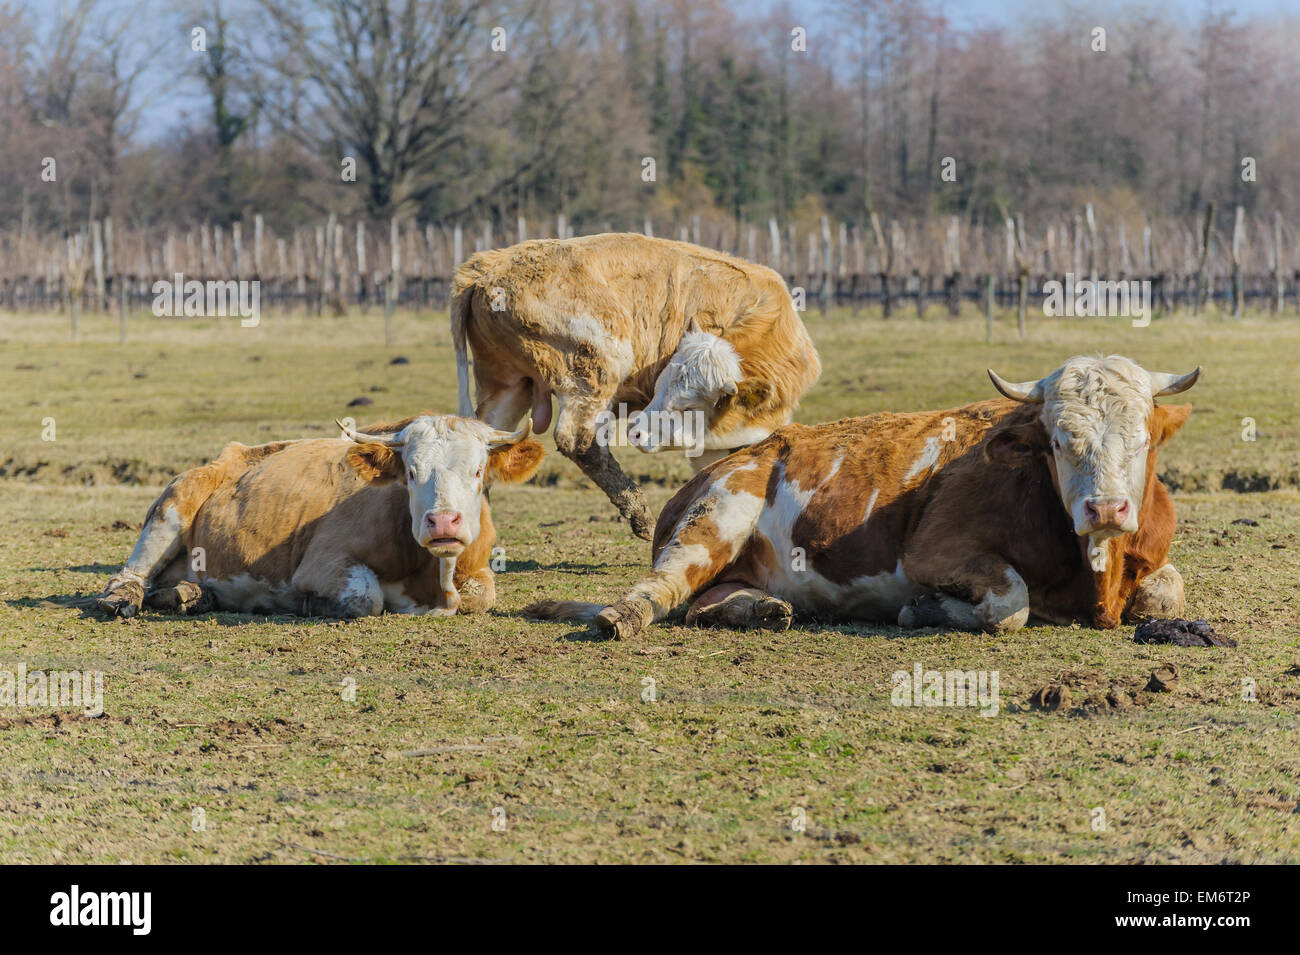 Three cows kept open, with the background of a vineyard. Stock Photo